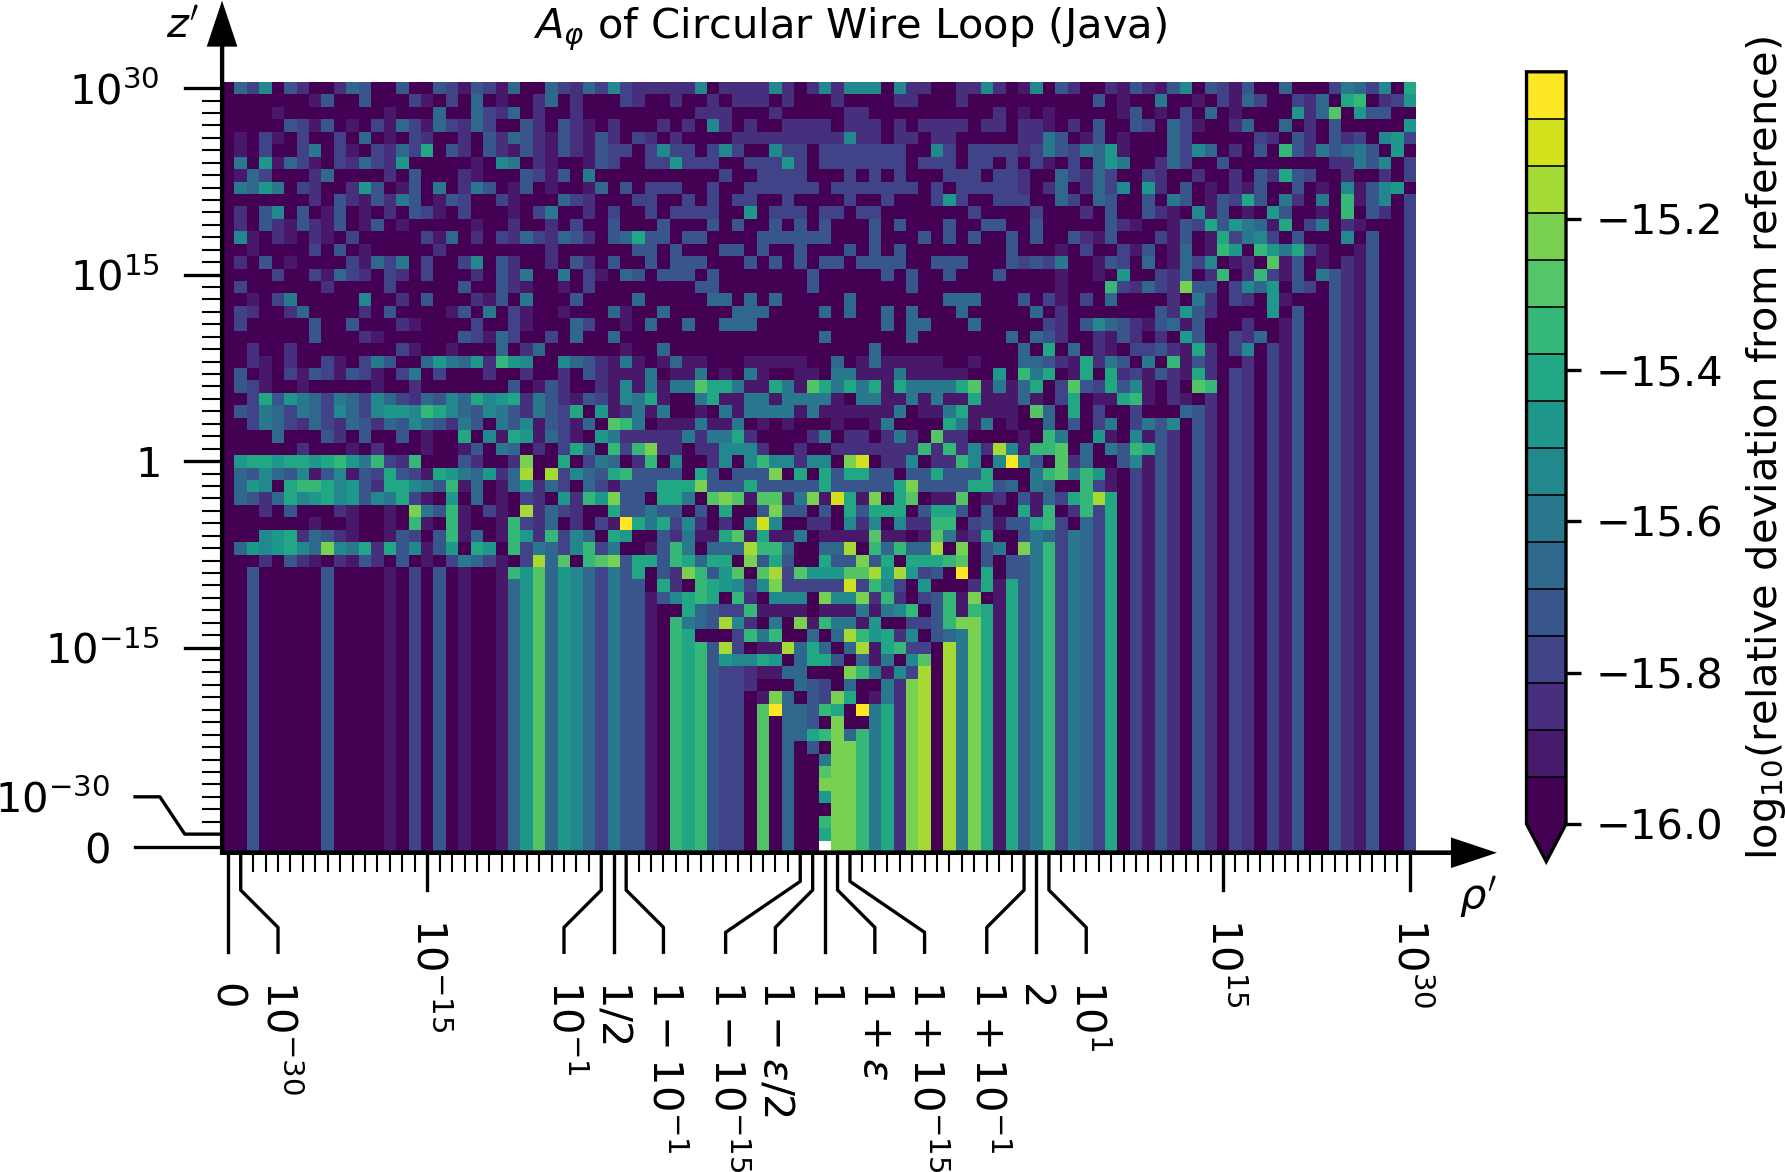 A_phi of Circular Wire Loop: Java vs. reference